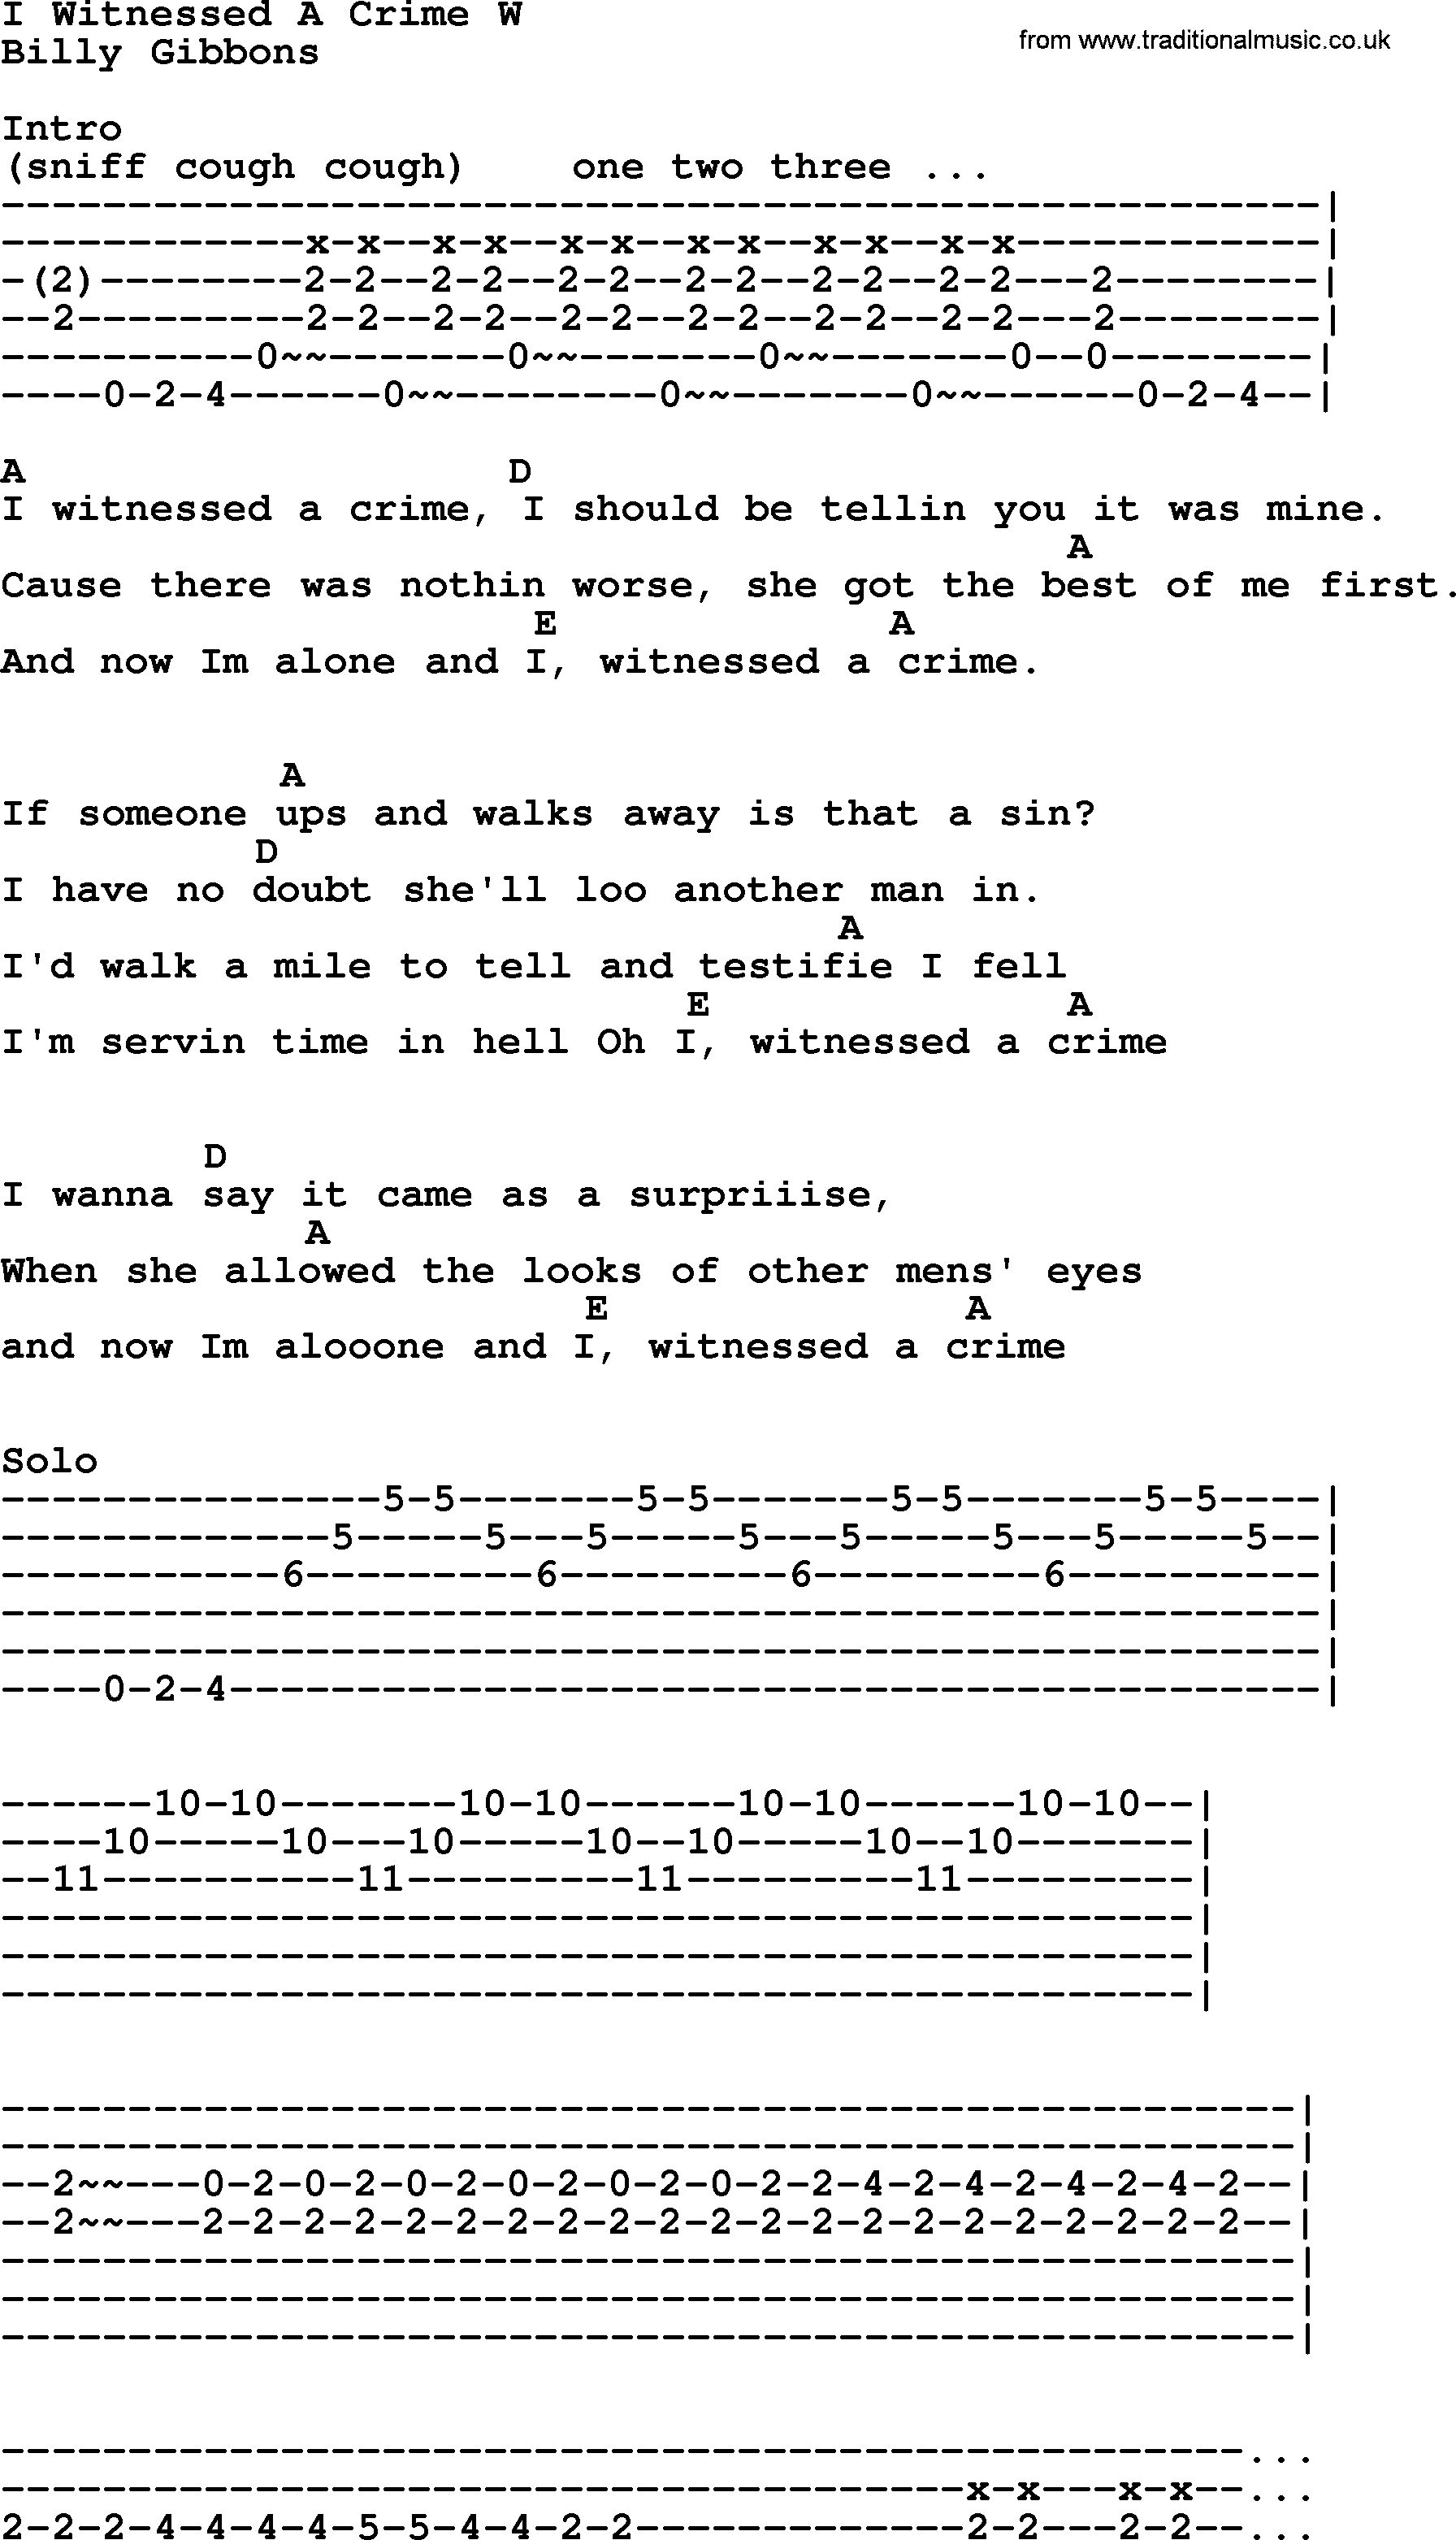 Johnny Cash song I Witnessed A Crime W, lyrics and chords